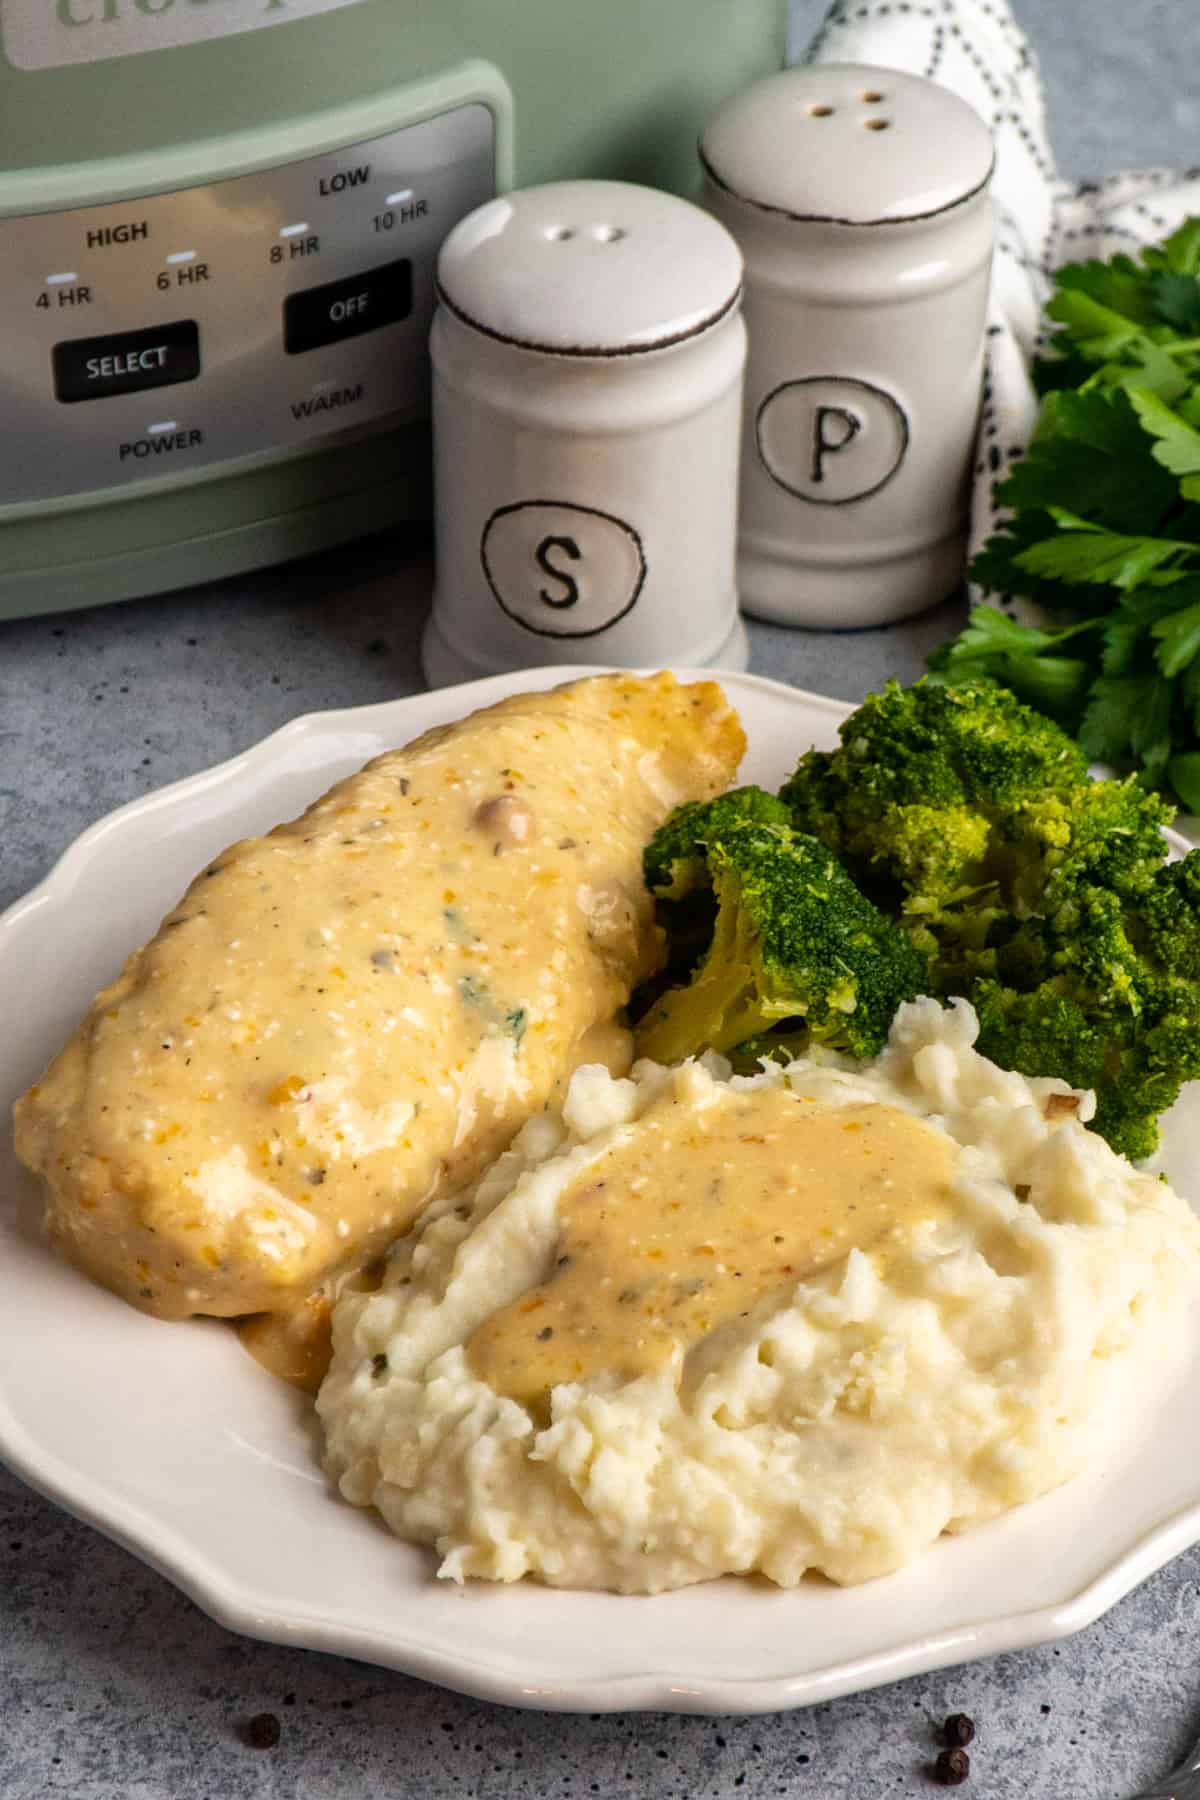 Slow cooker chicken with sauce on a white plate.